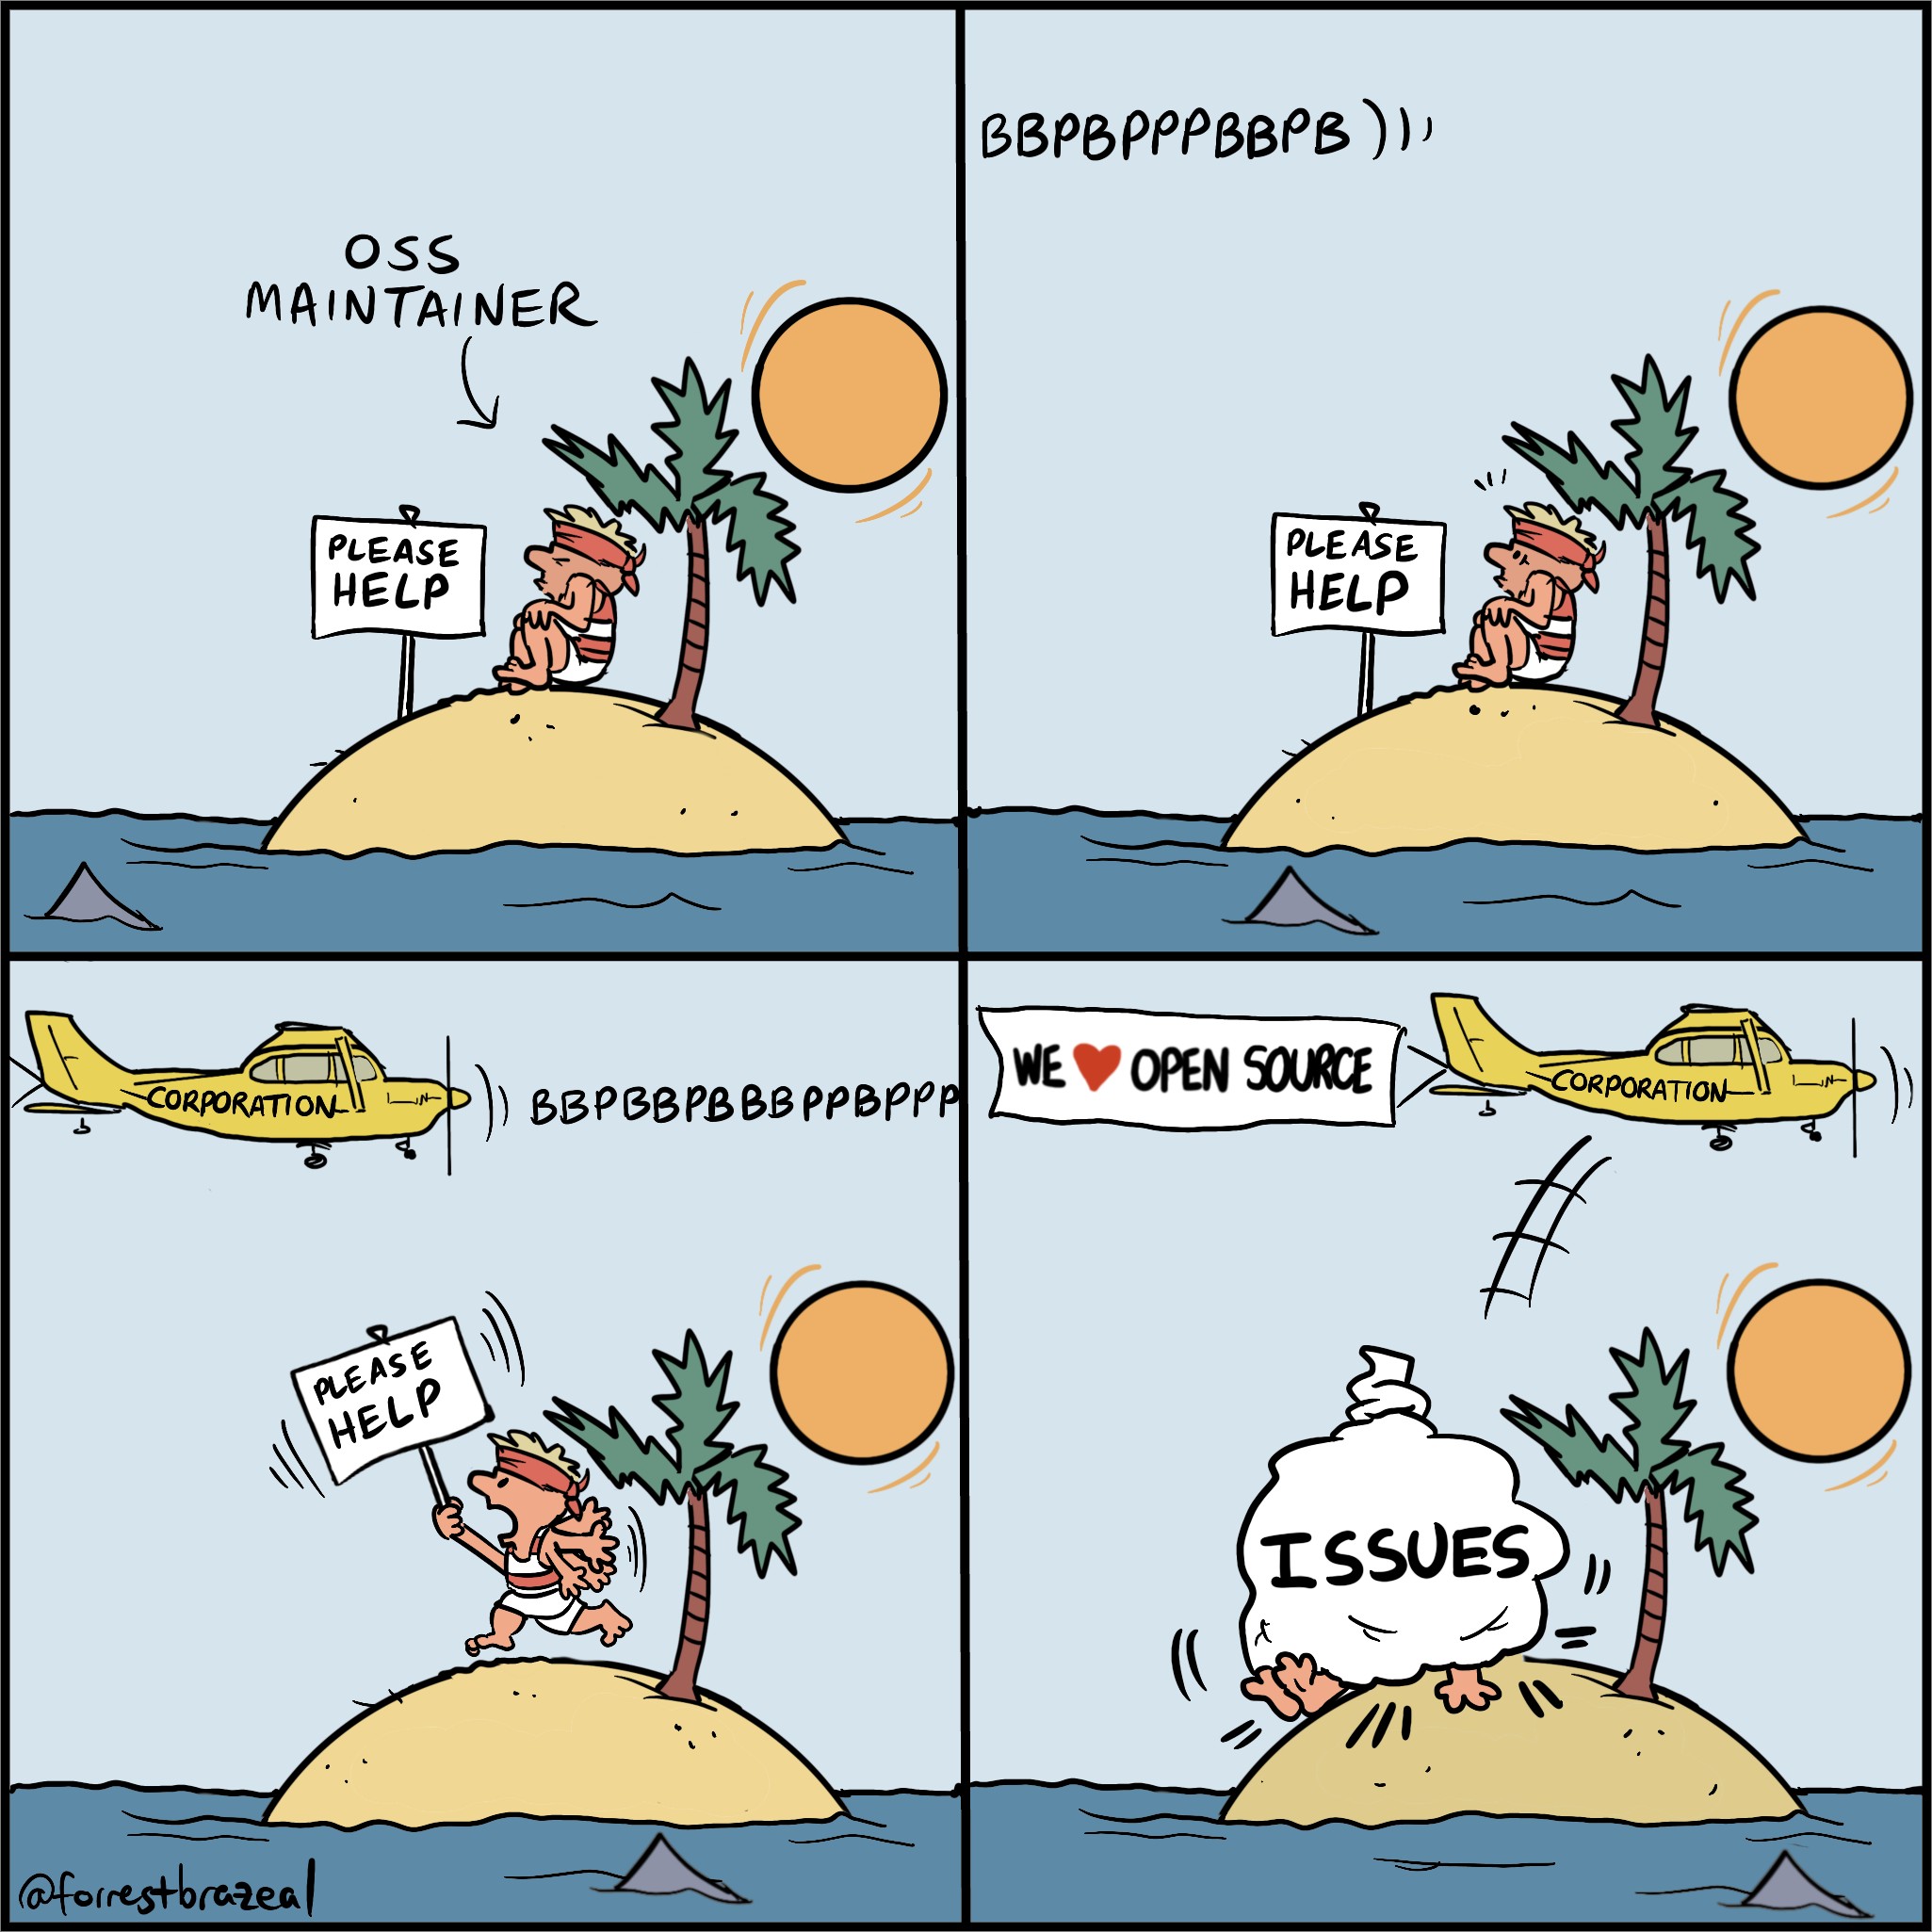 Cartoon by Forest Brazeal depicting an open source maintainer requesting help from a stranded island, only to see a plane marked "corporation" that flies a banner that says they love open source, however they drop a bag labeled issues on top of the stranded maintainer. 